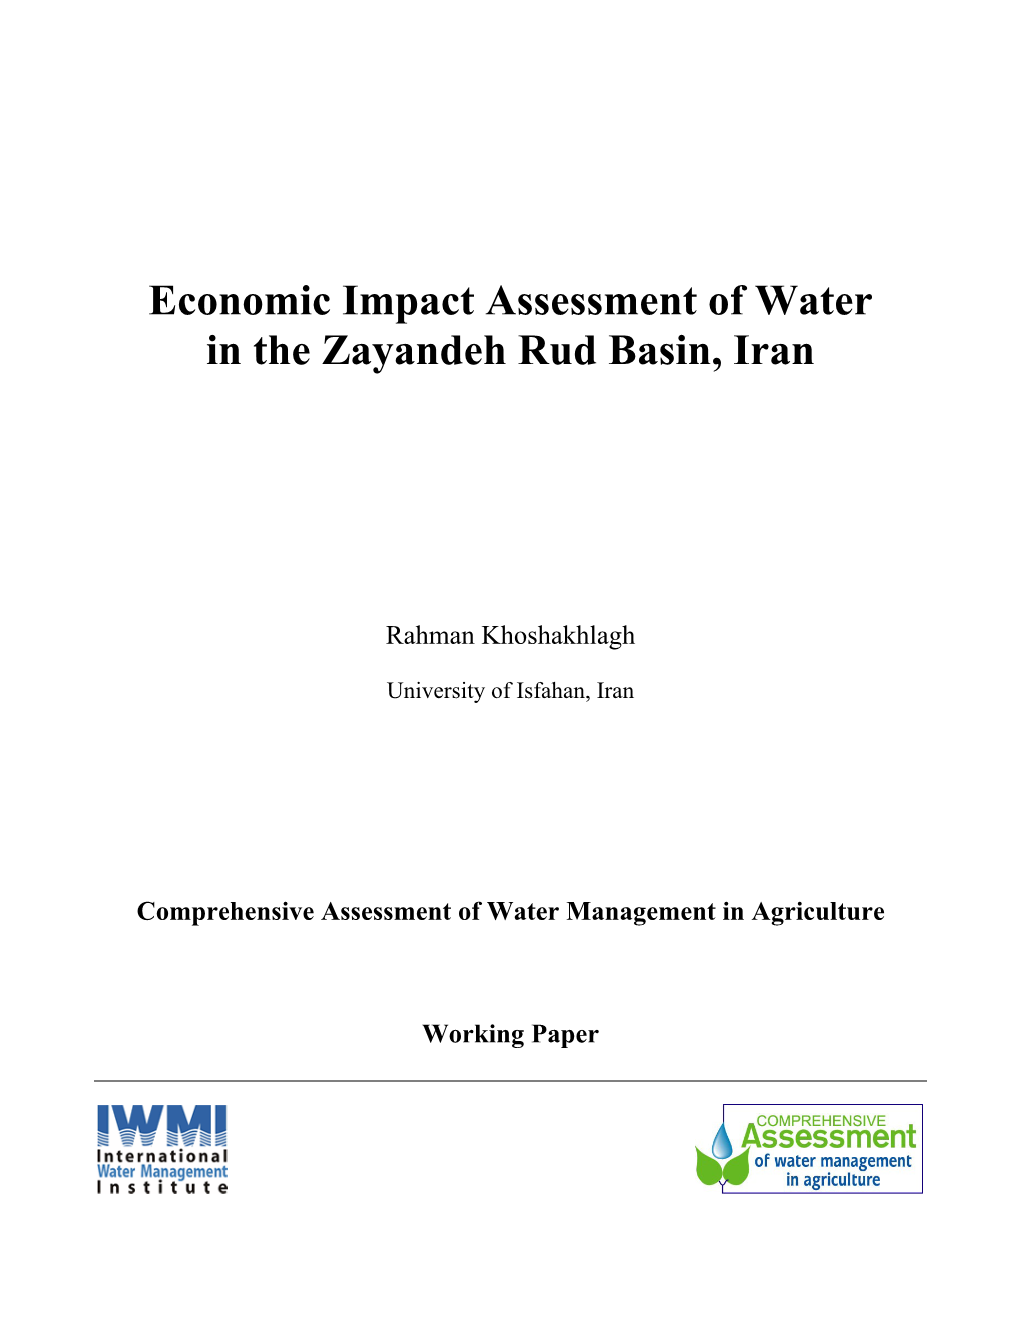 Economic Impact Assessment of Water in the Zayandeh Rud Basin, Iran